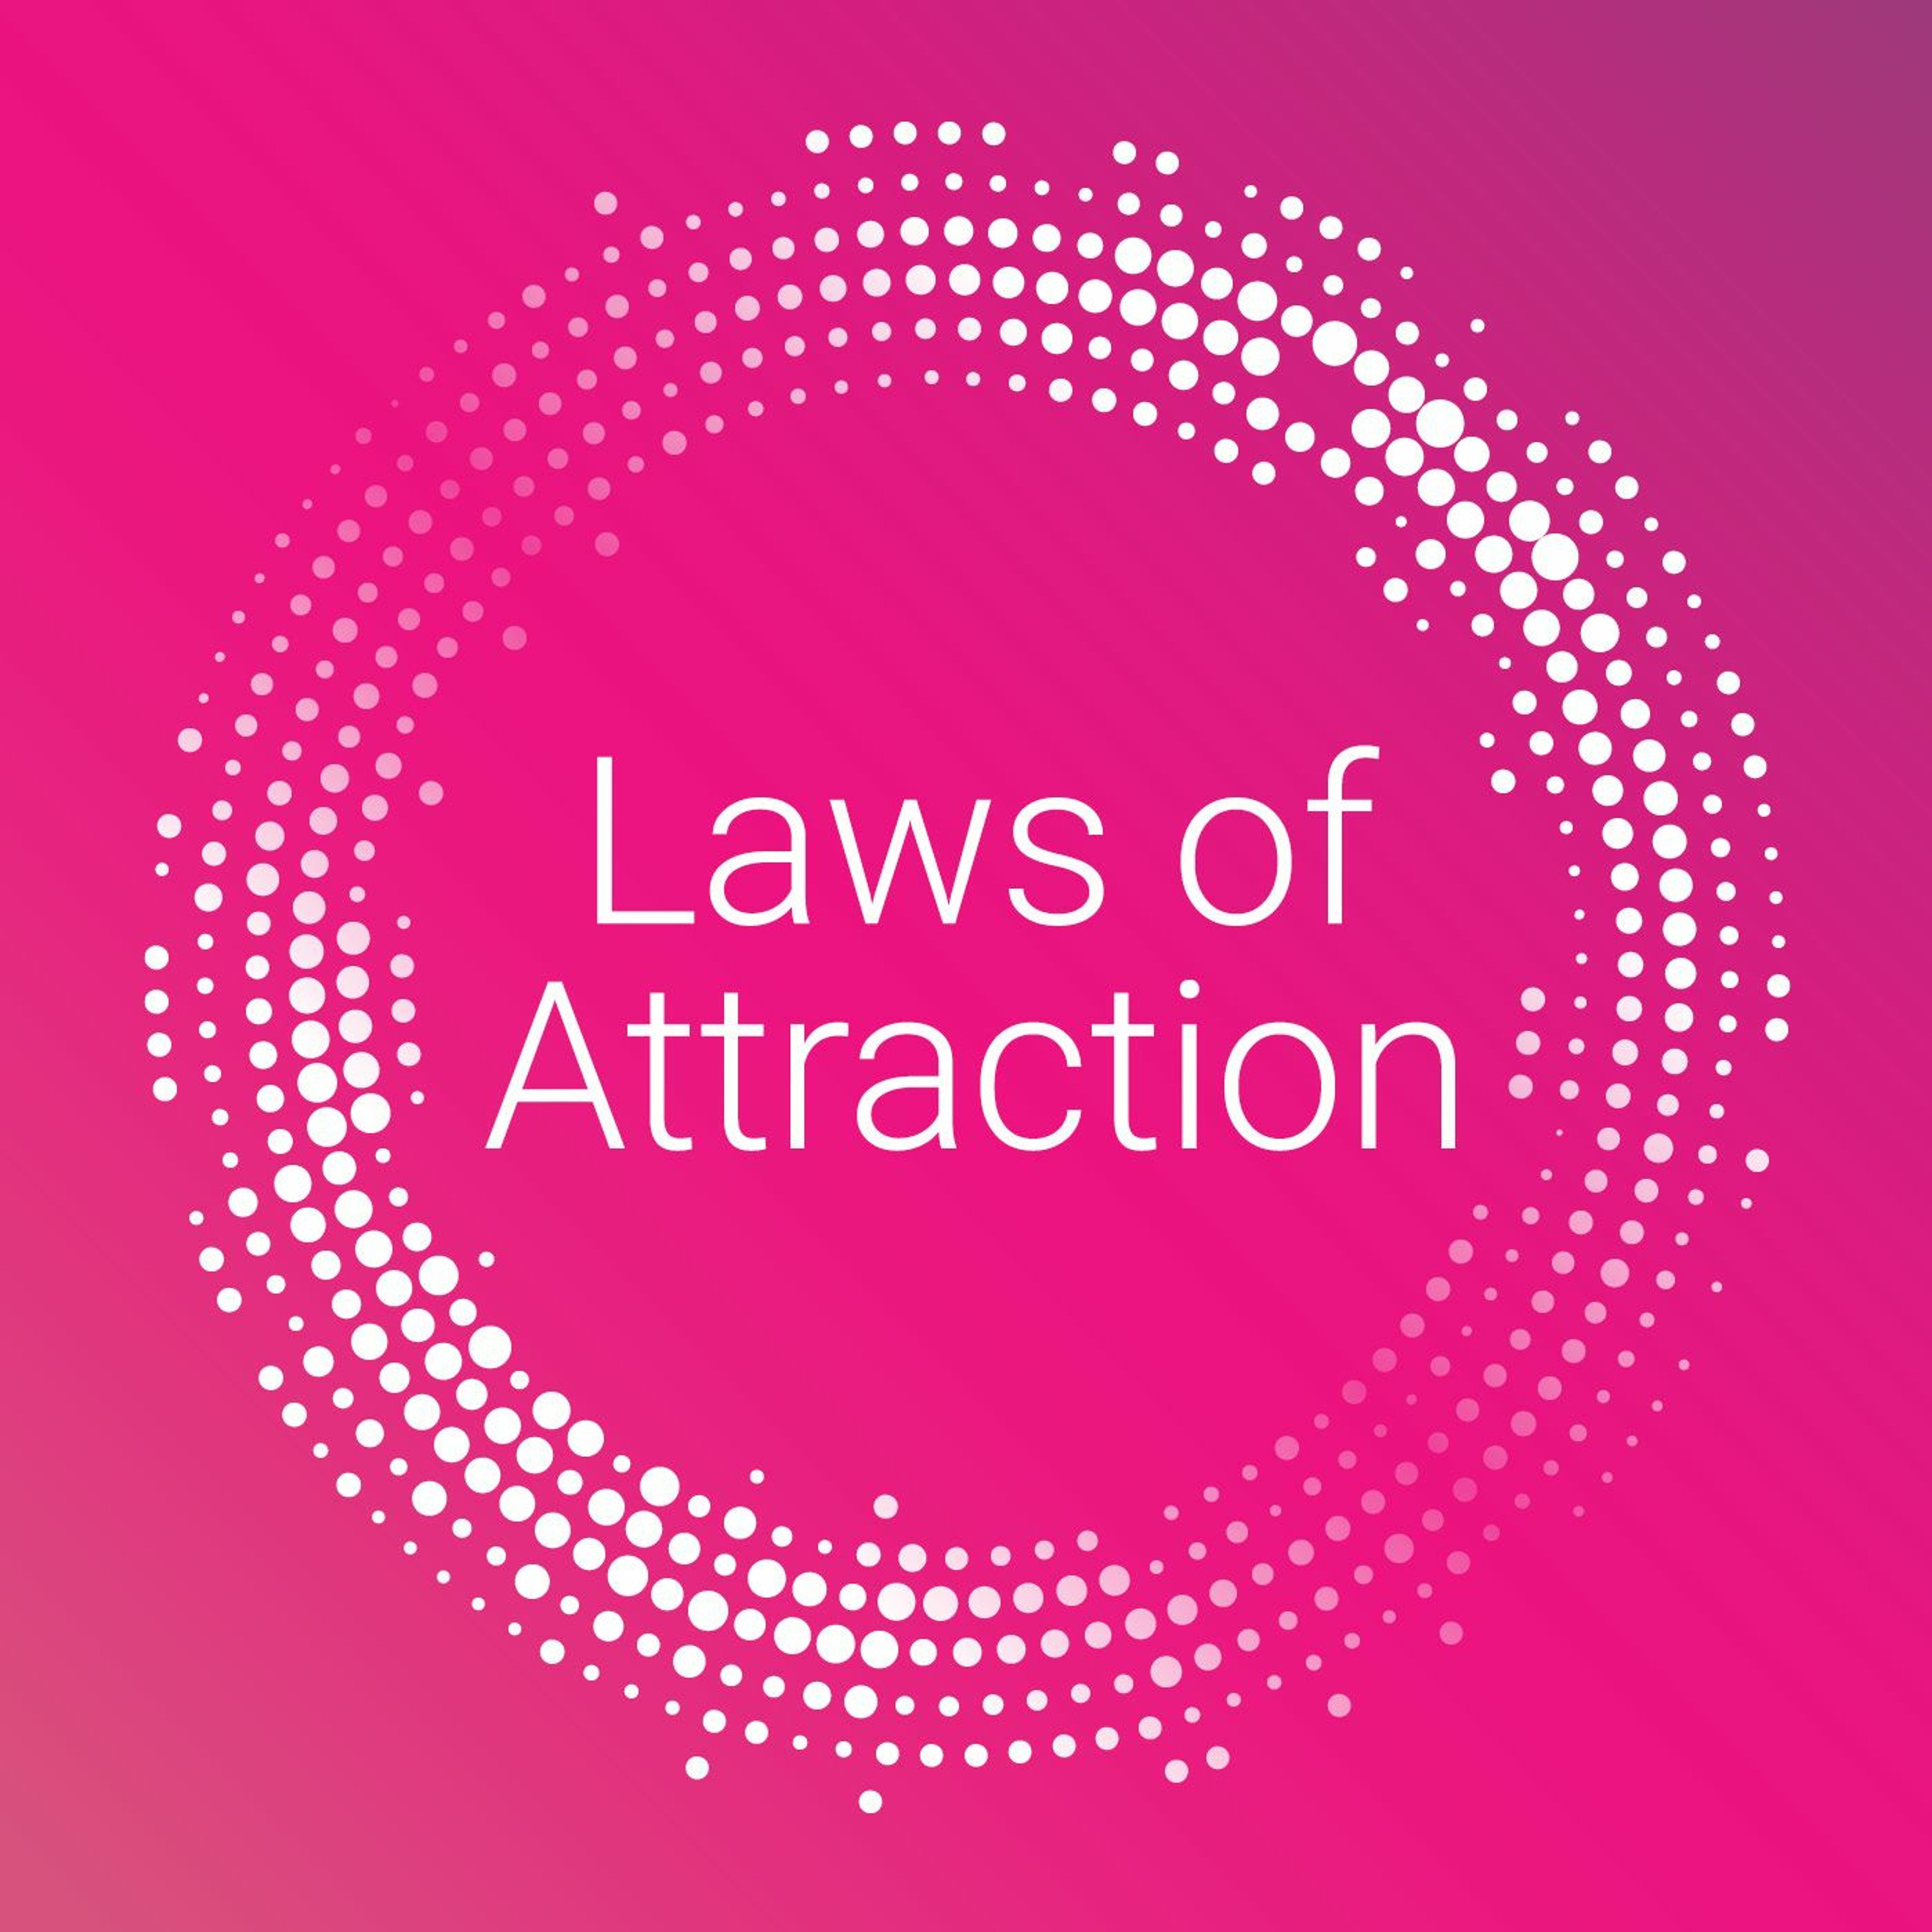 Laws of Attraction - What women want at work